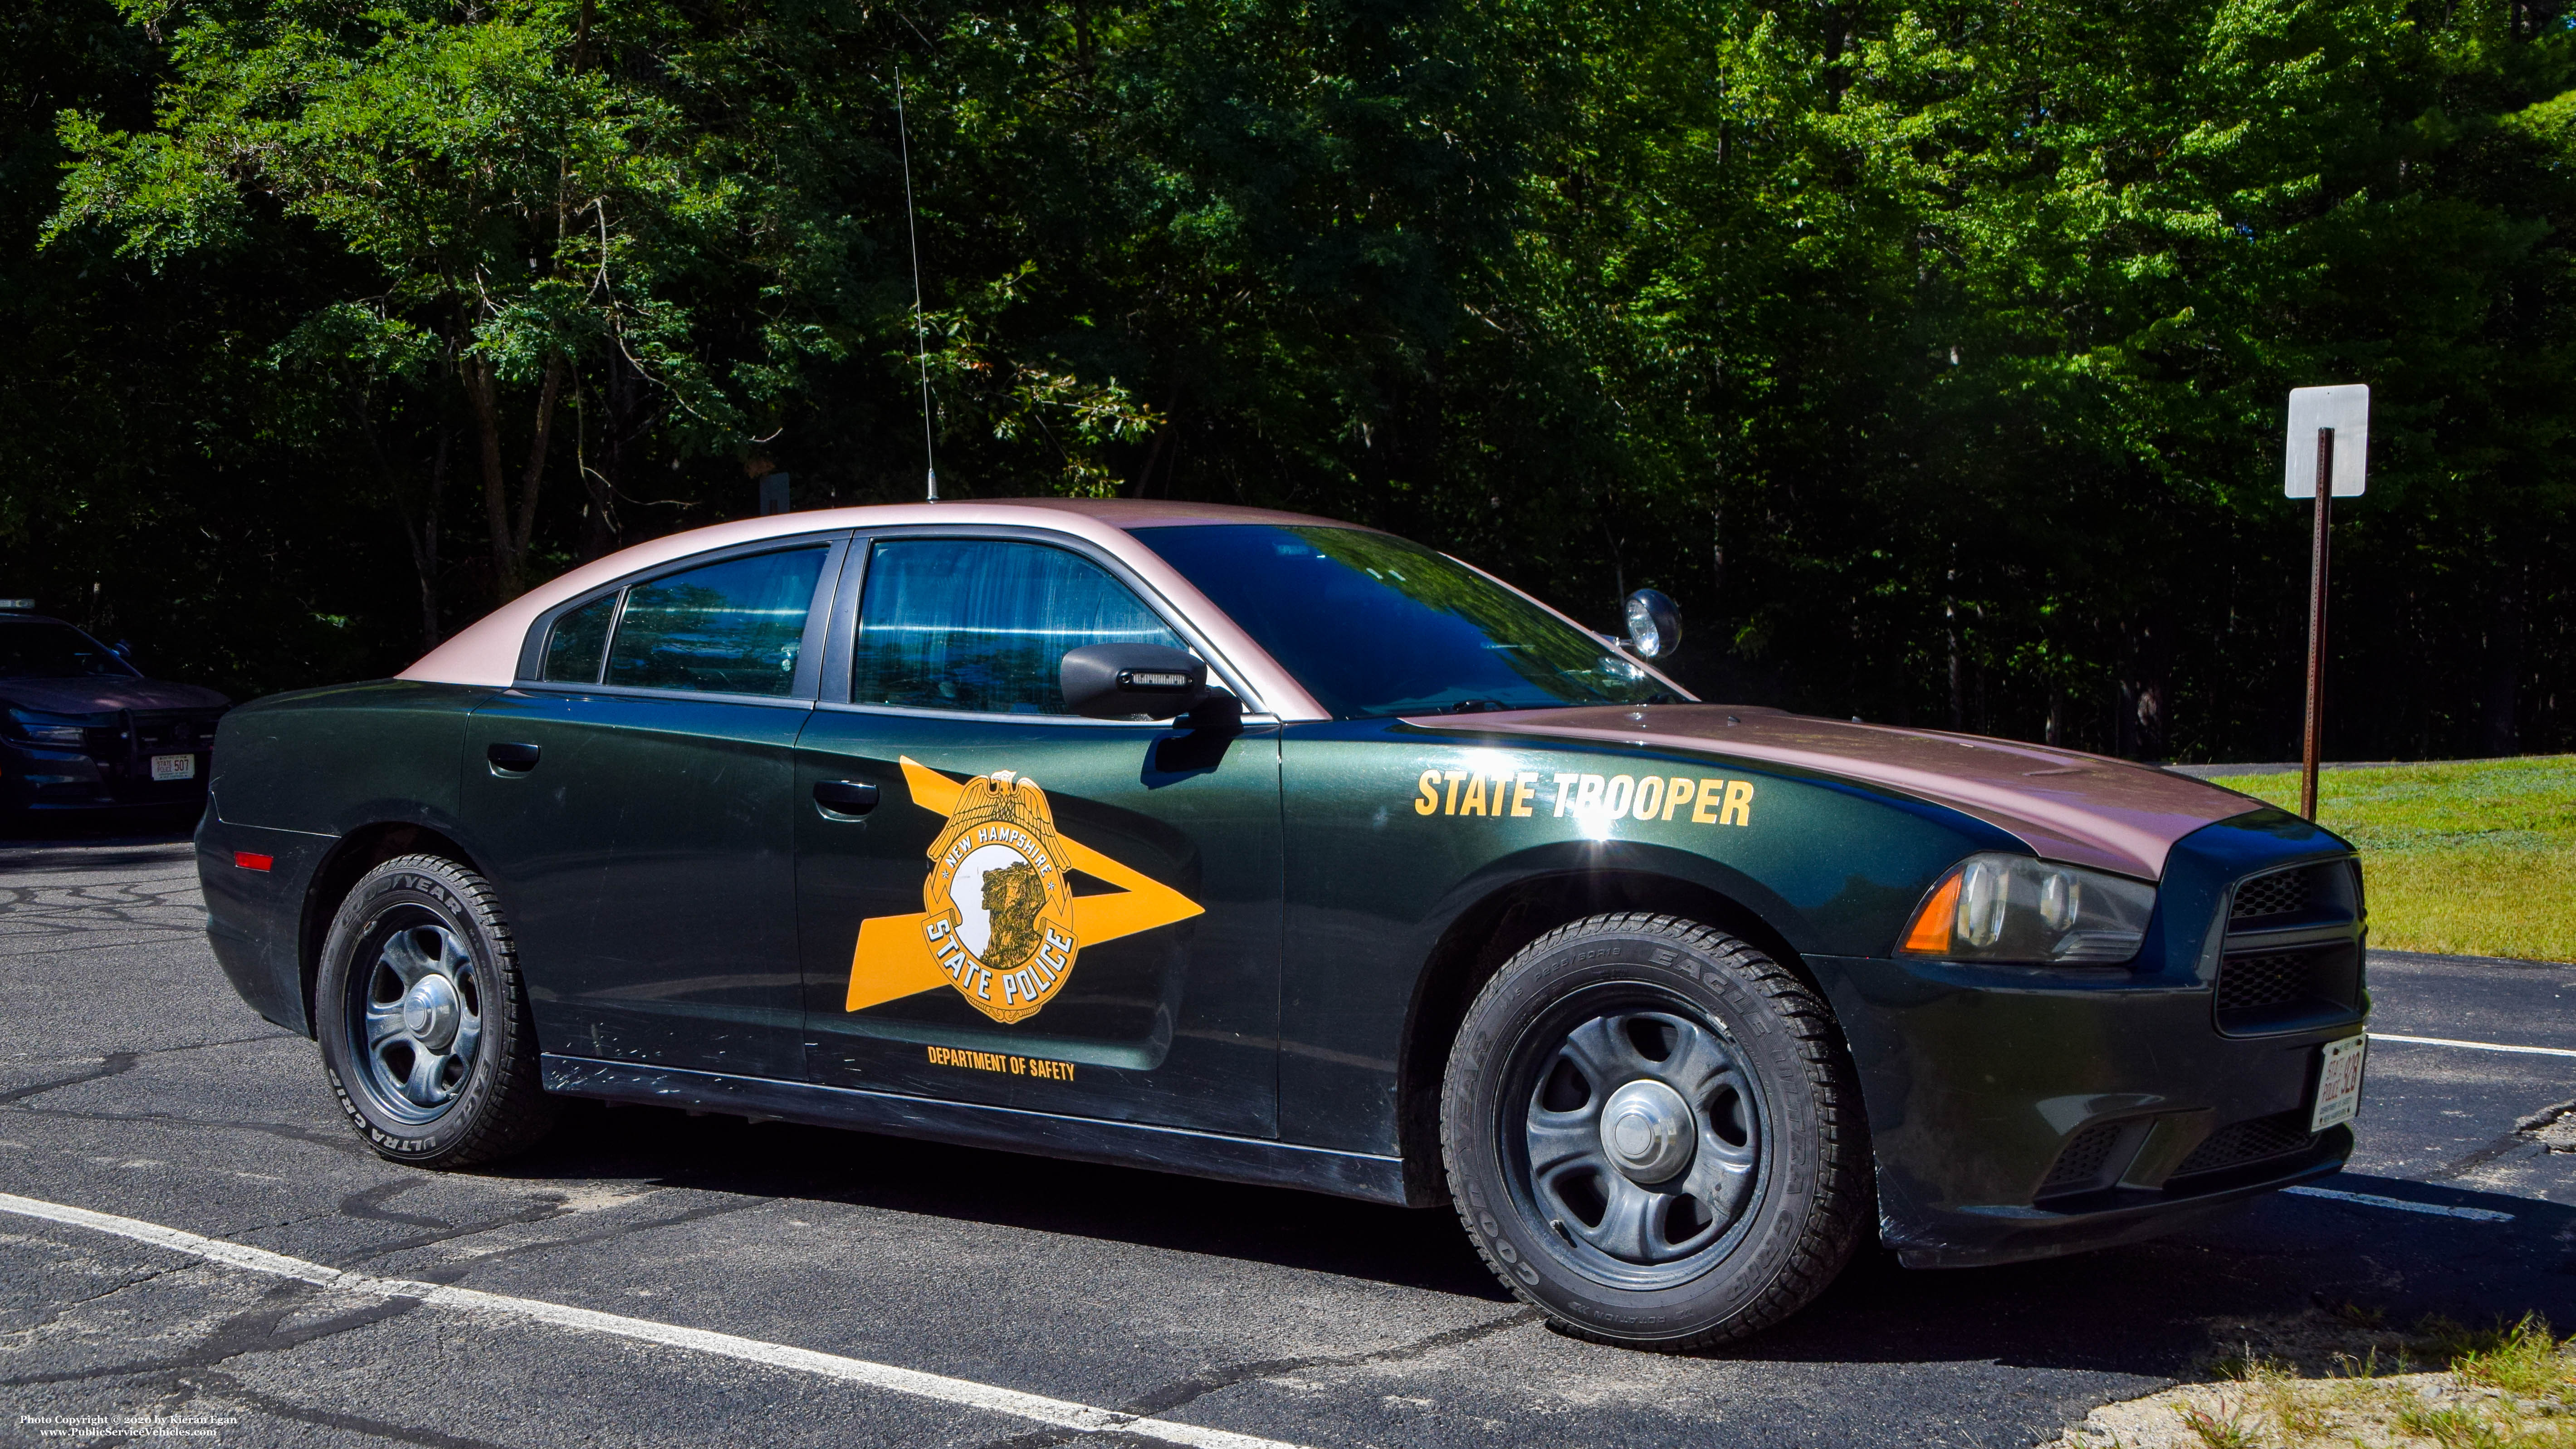 A photo  of New Hampshire State Police
            Cruiser 928, a 2011-2014 Dodge Charger             taken by Kieran Egan